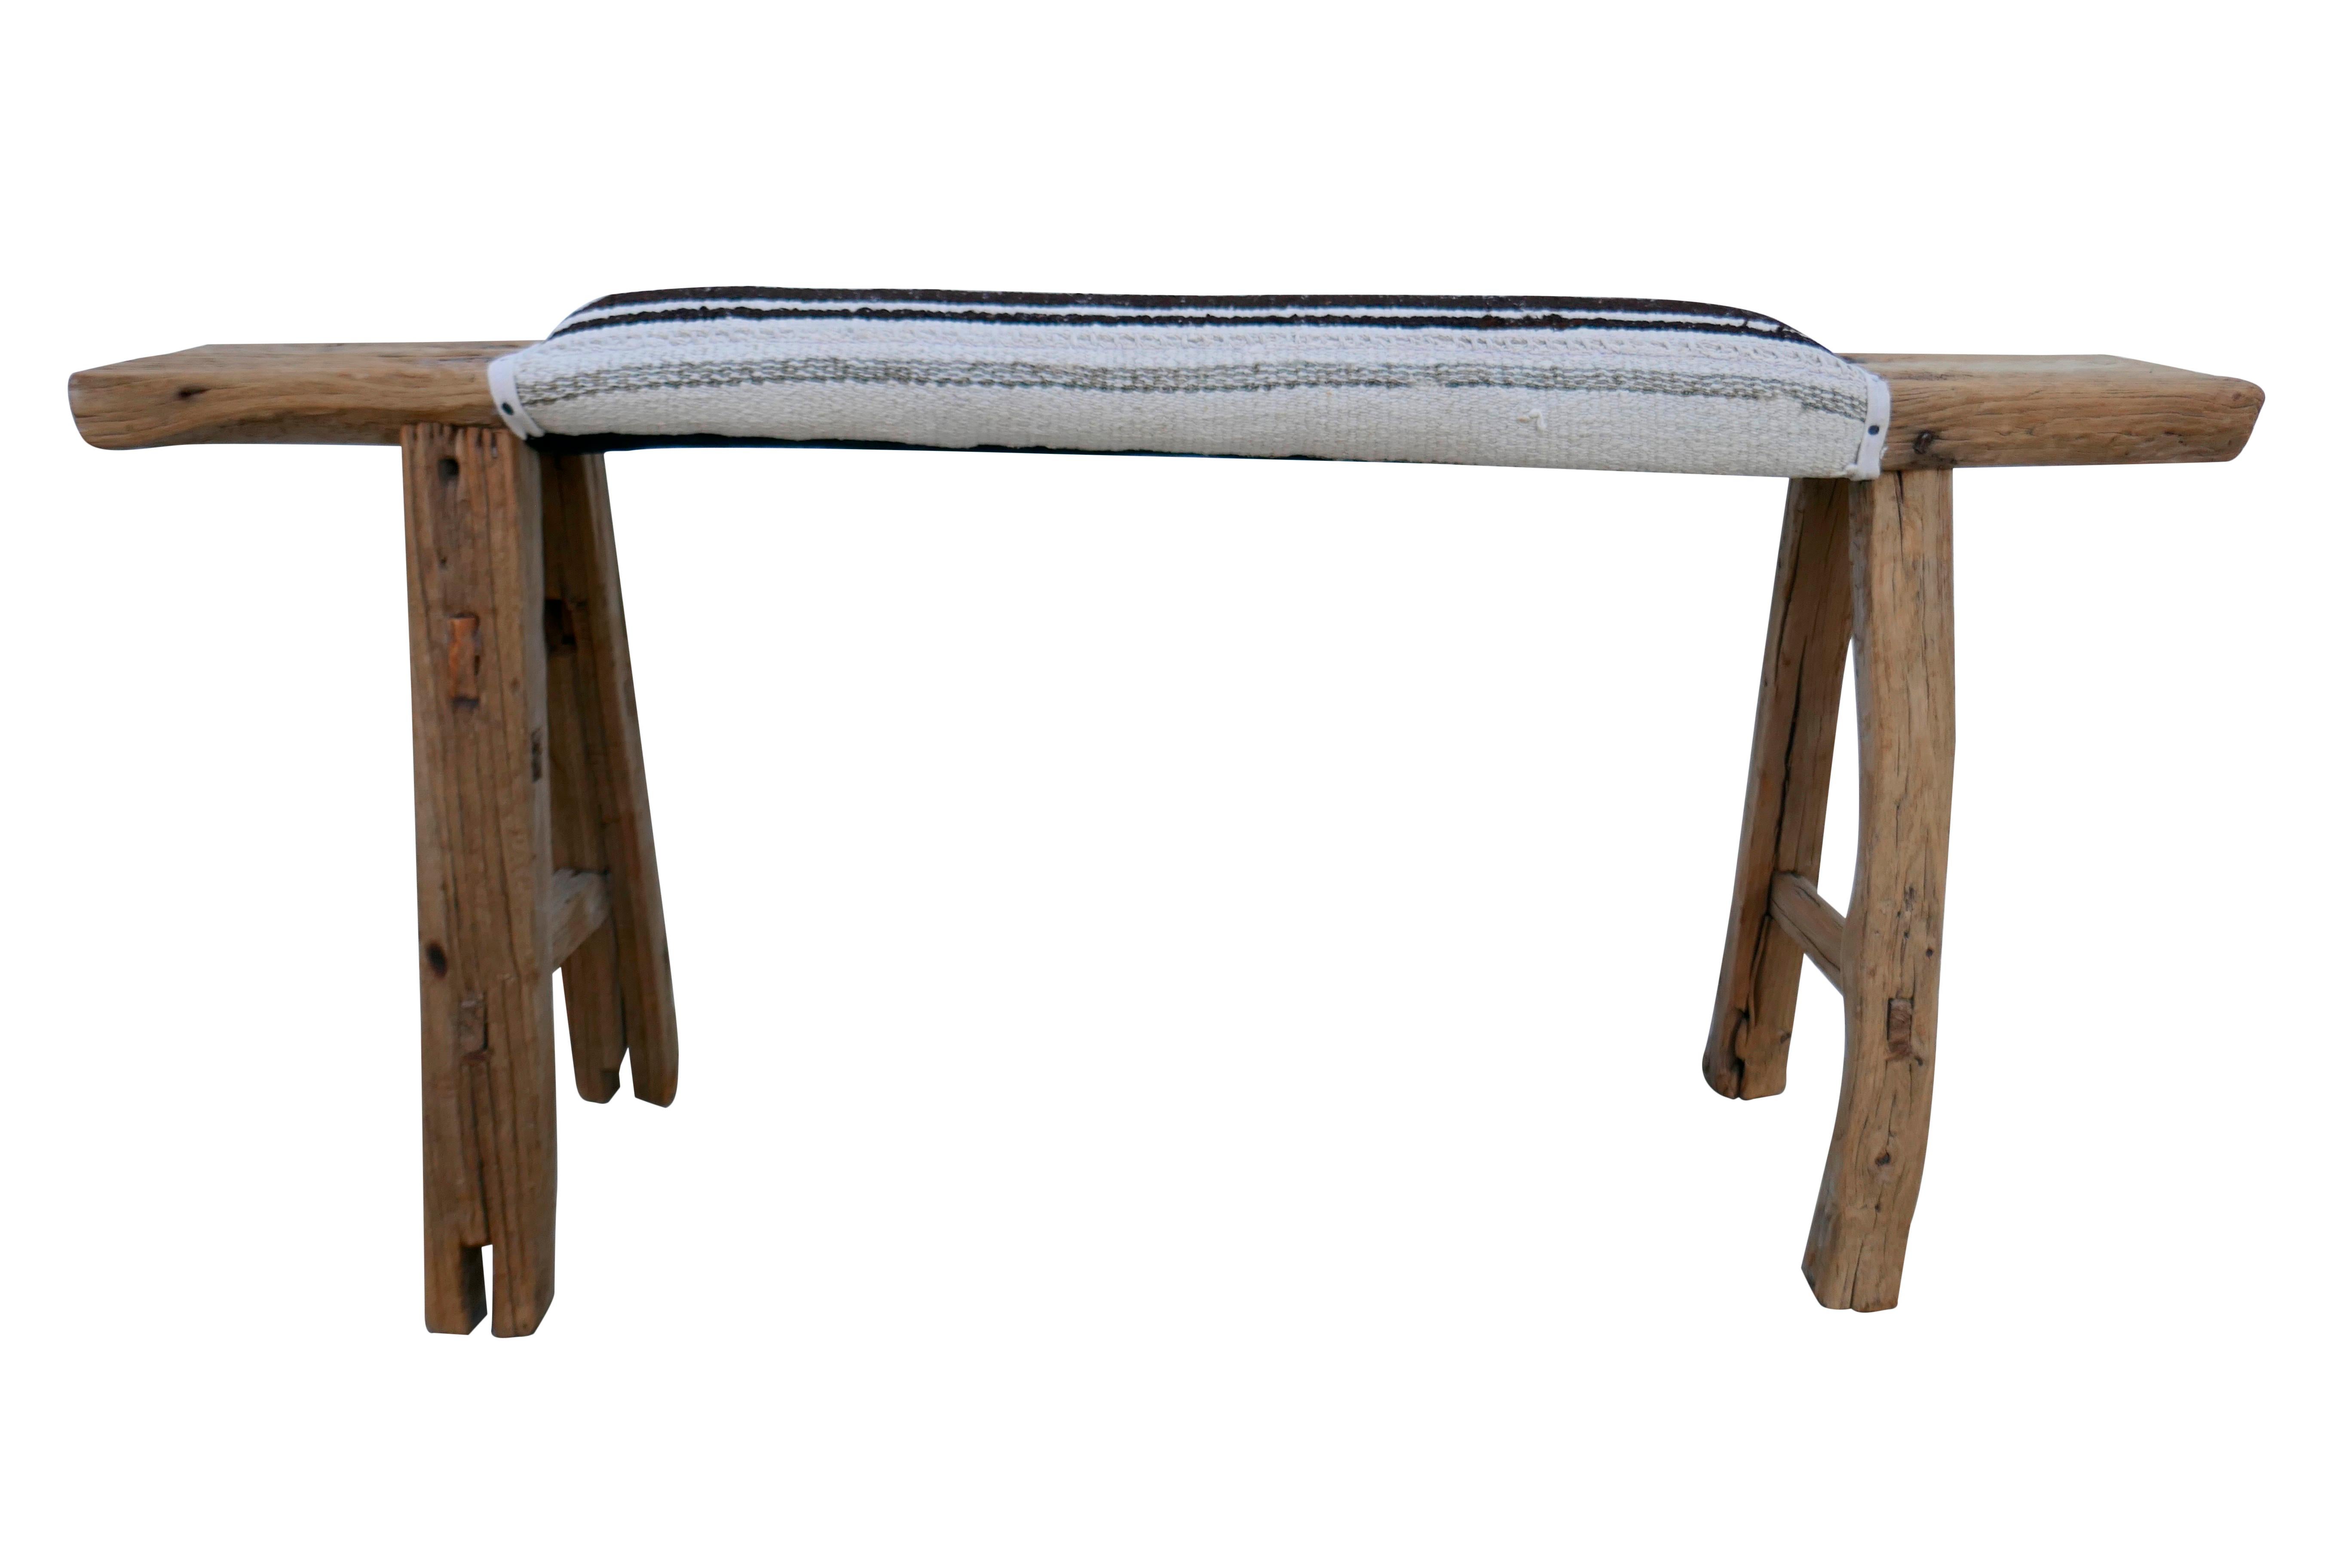 Vintage authentic Shandong elmwood bench upholstered in authentic vintage Anatolian Berber hand-spun Kilim hemp in neutral tones. Primitively hand-built with mortise & tenon joinery. Showing much desirable natural age character and patina.